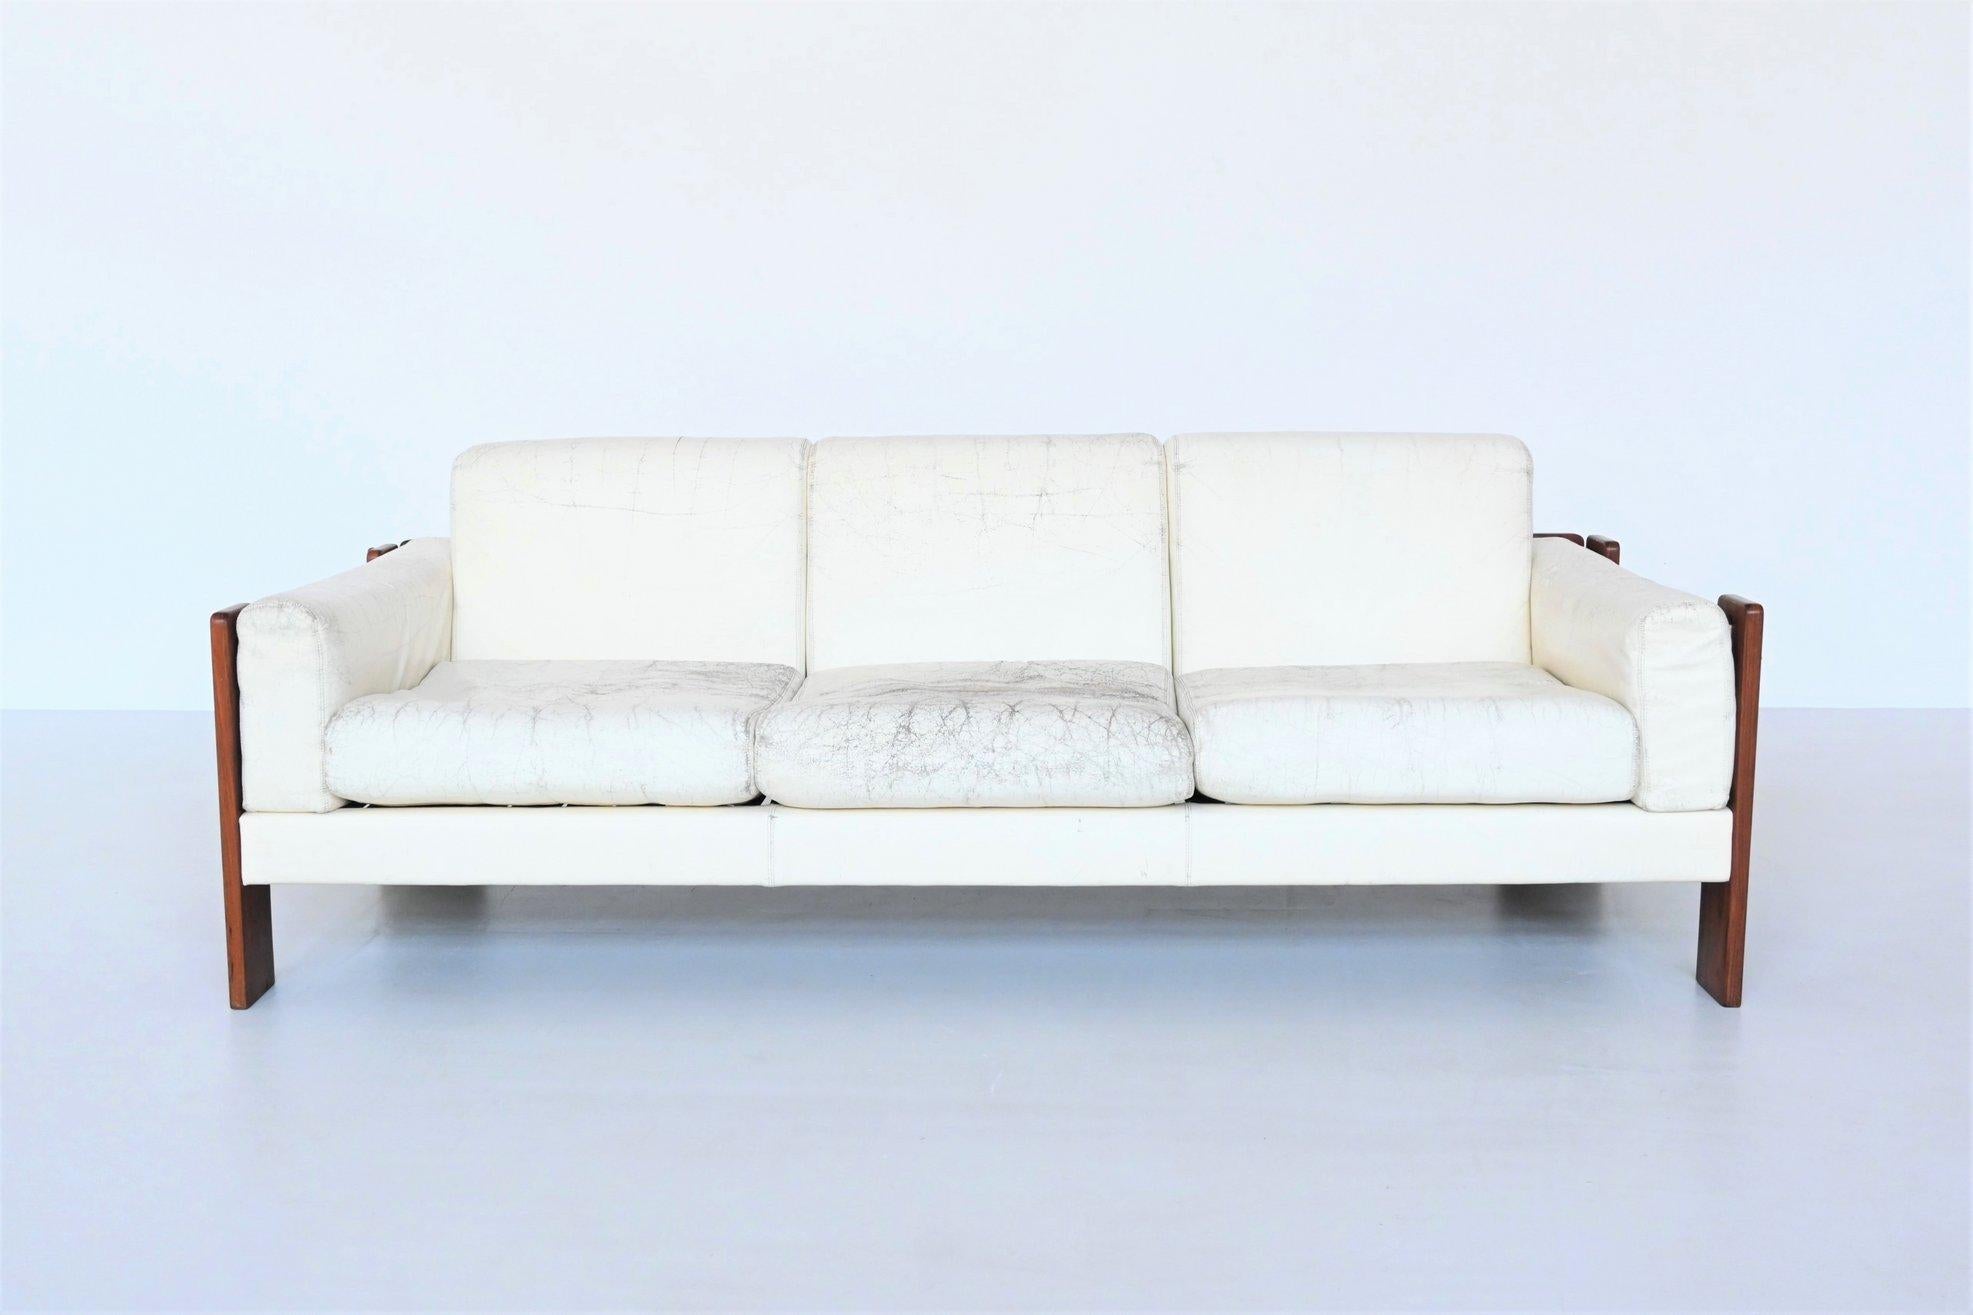 Beautiful shaped Italian lounge sofa in the style of Tobia Scarpa and Percival Lafer, Italy 1970. This unique three-seater sofa has a solid rosewood frame with white leather cushions. The model is very reminiscent of Tobia Scarpa's Bastiano sofa,